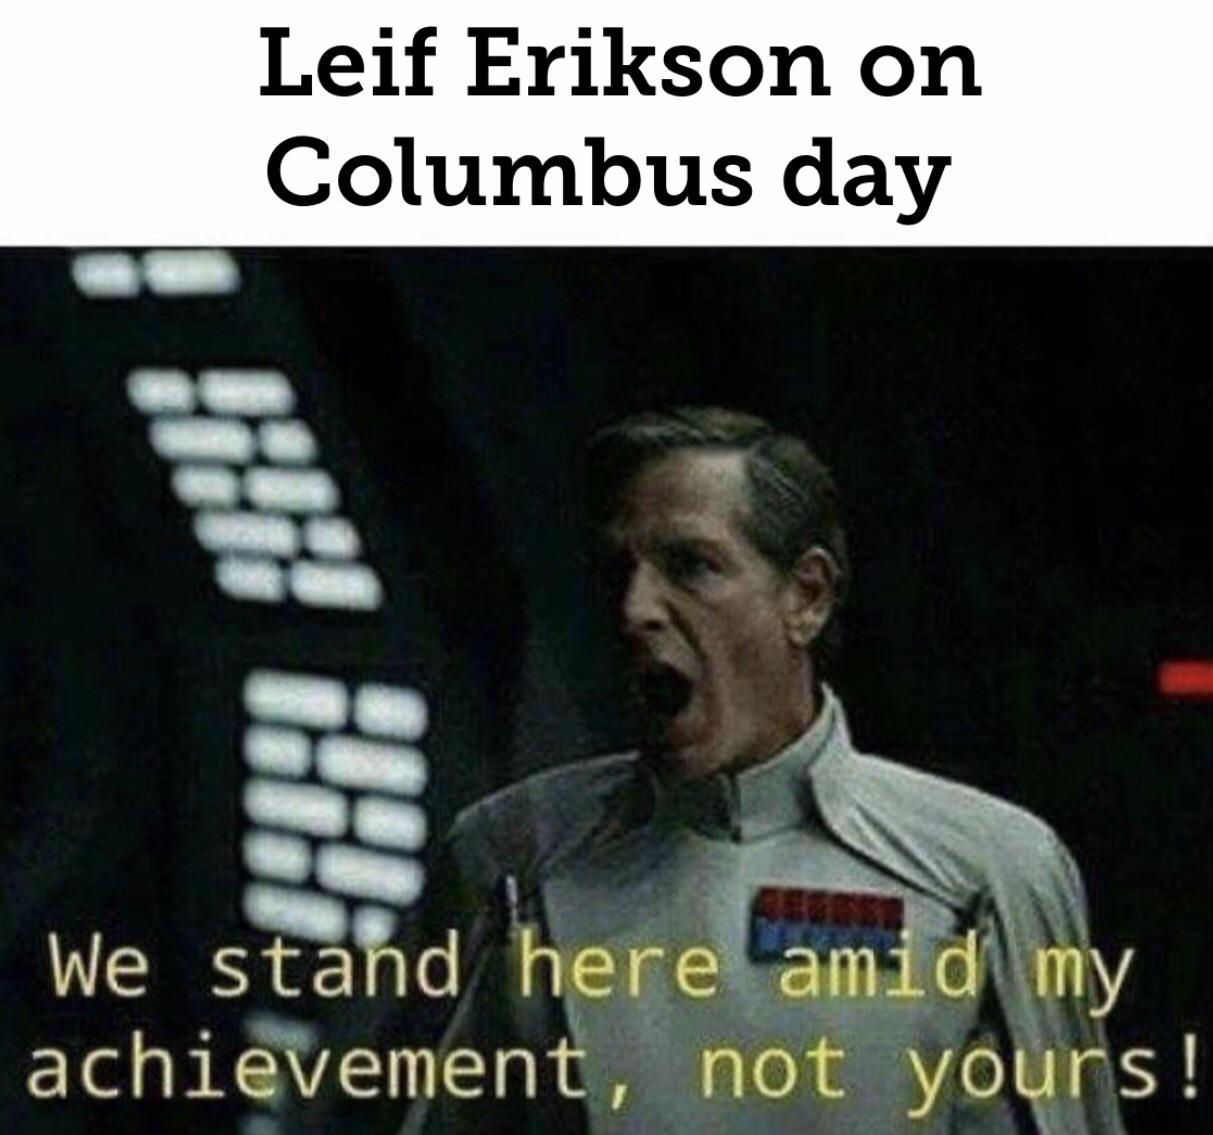 columbus day meme - ww1 germany memes - Leif Erikson on Columbus day We stand here amid my achievement, not yours!